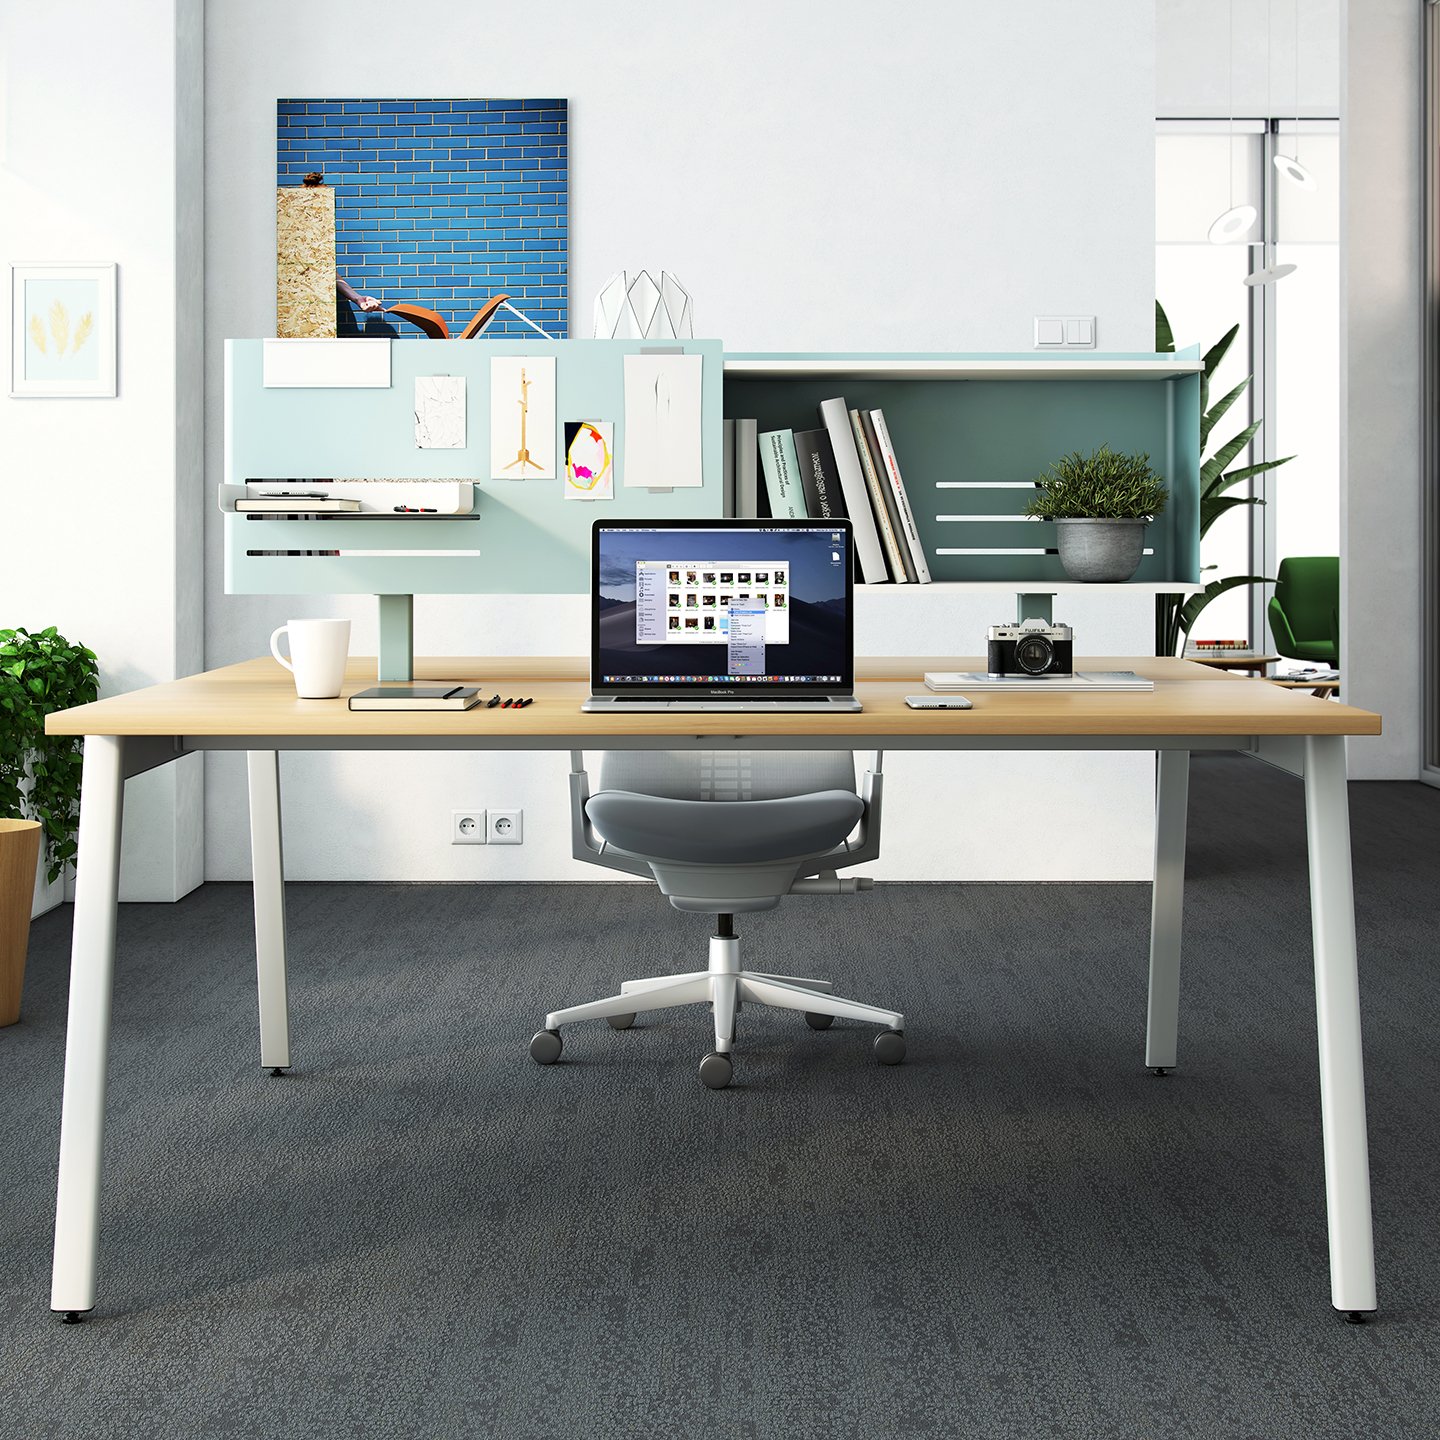 Active Components with shelf over desk in blue with white table legs